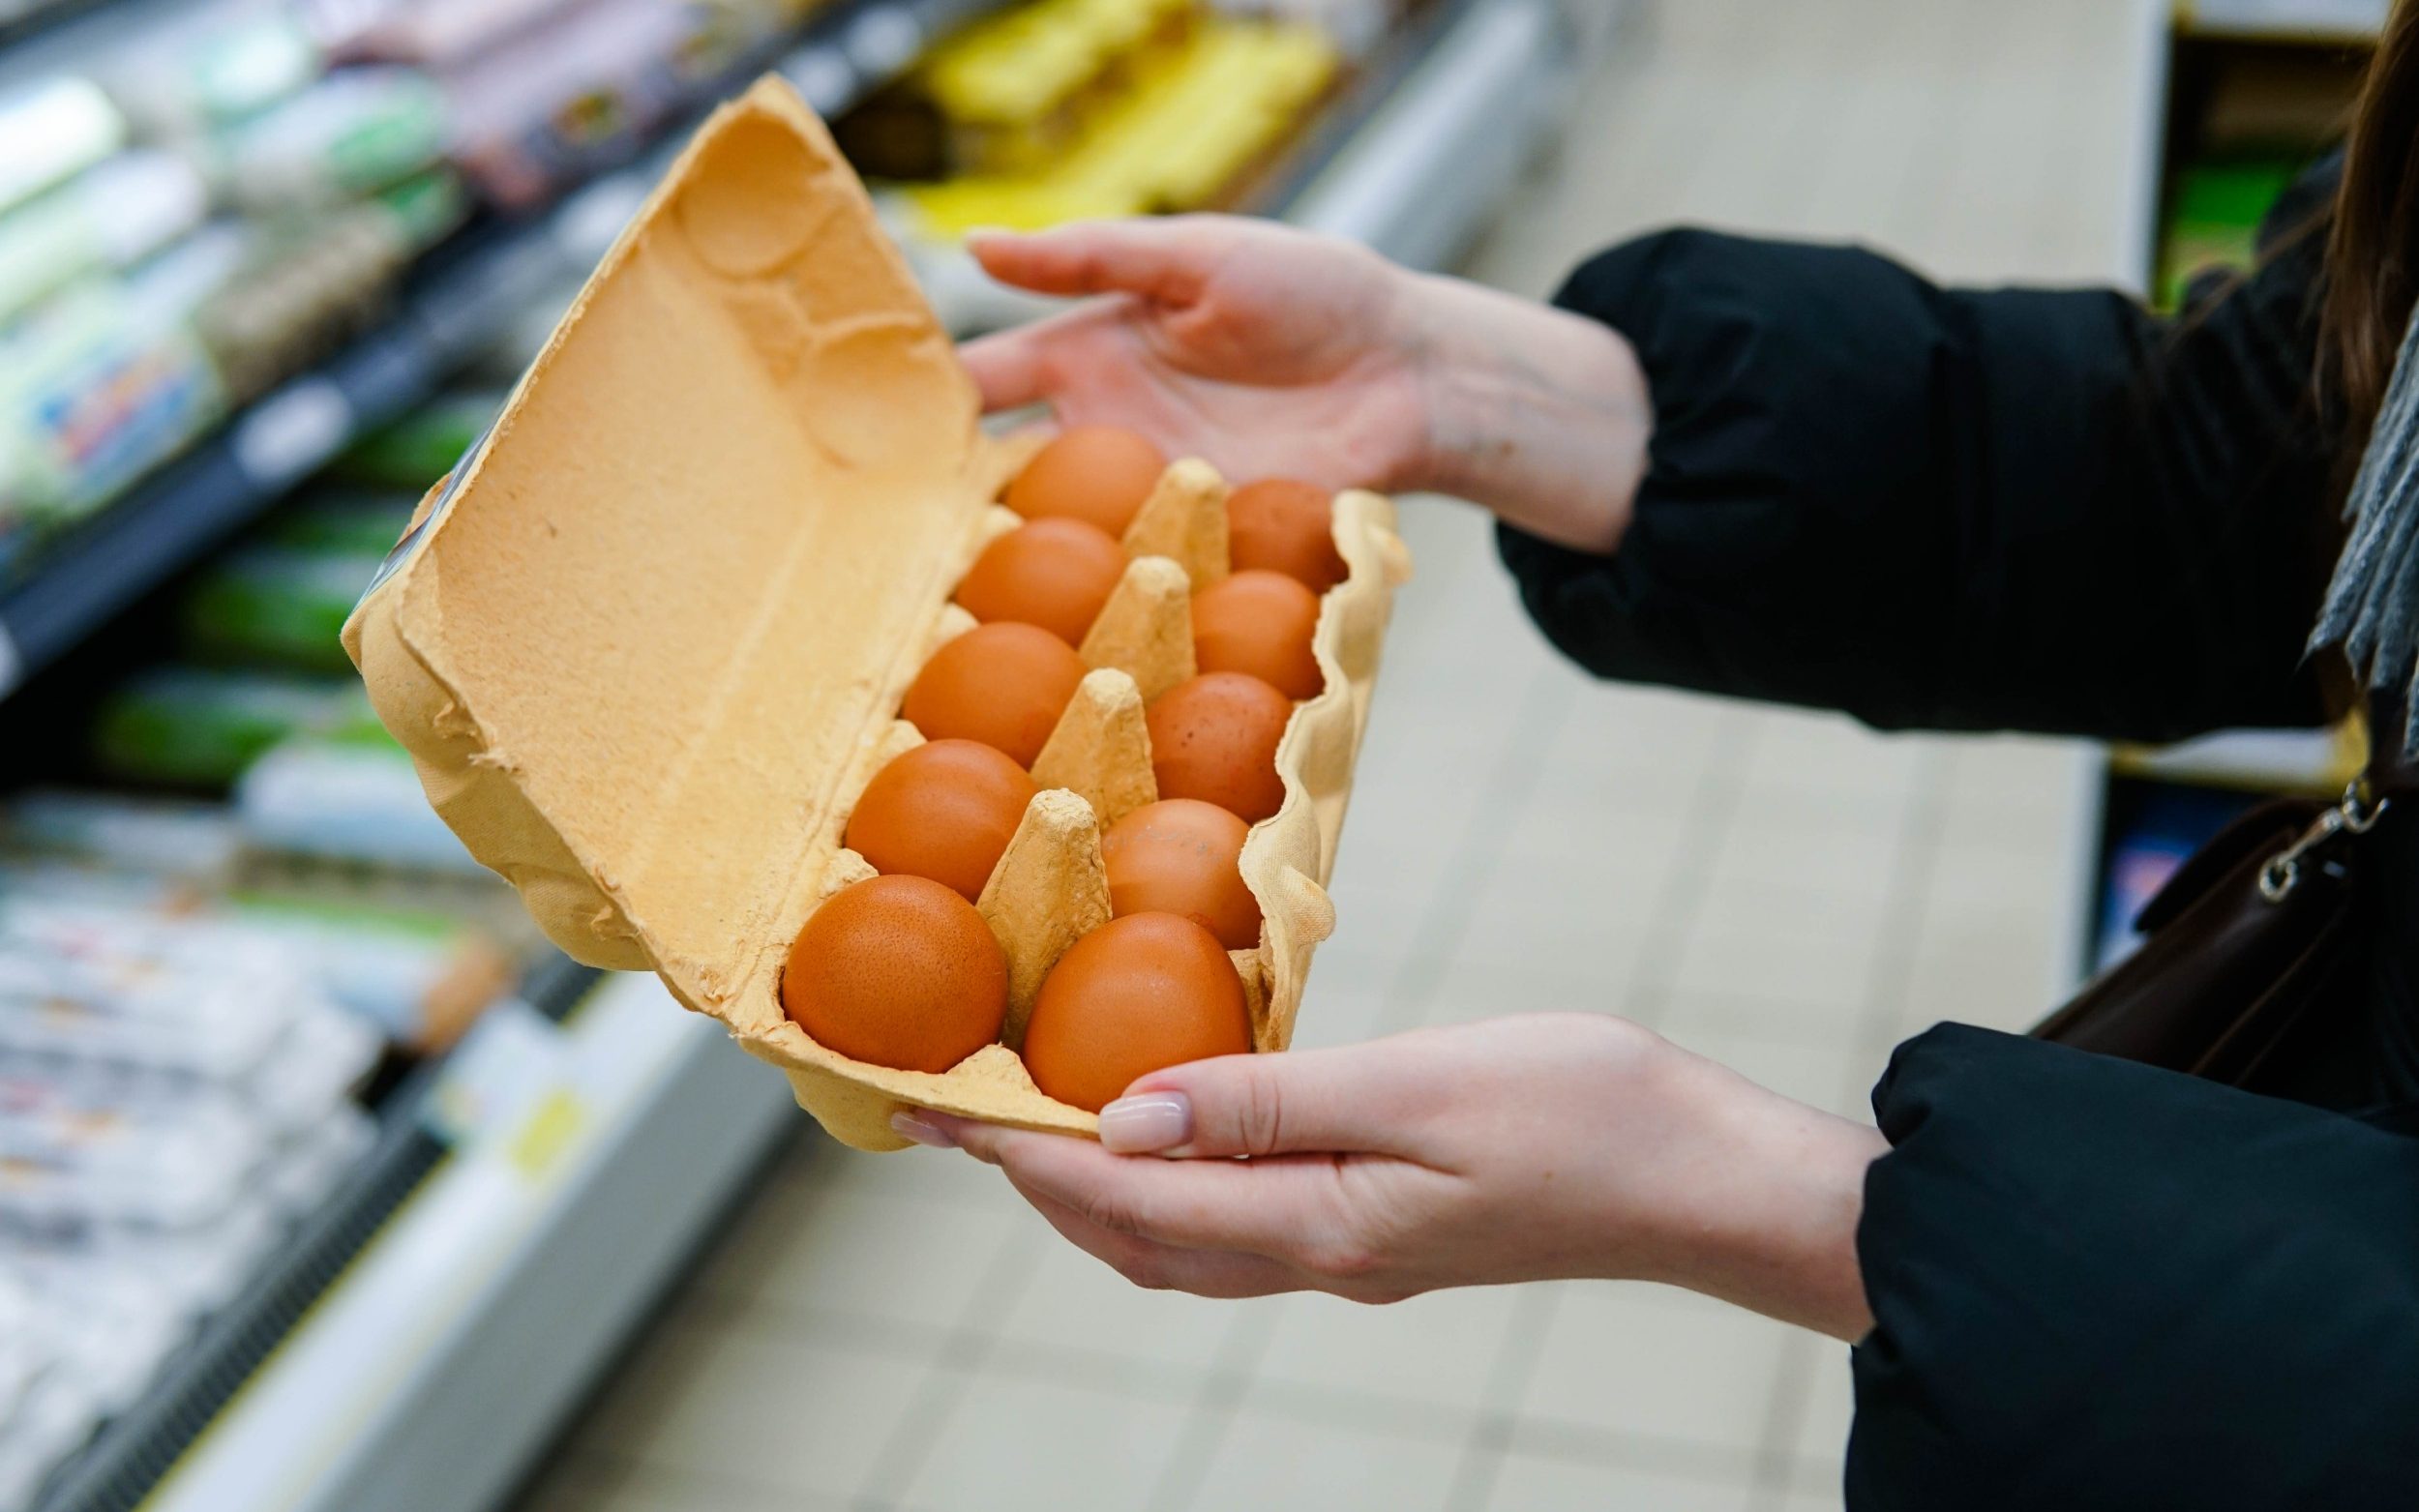 organic, free range or battery farmed? the best supermarket eggs for your health